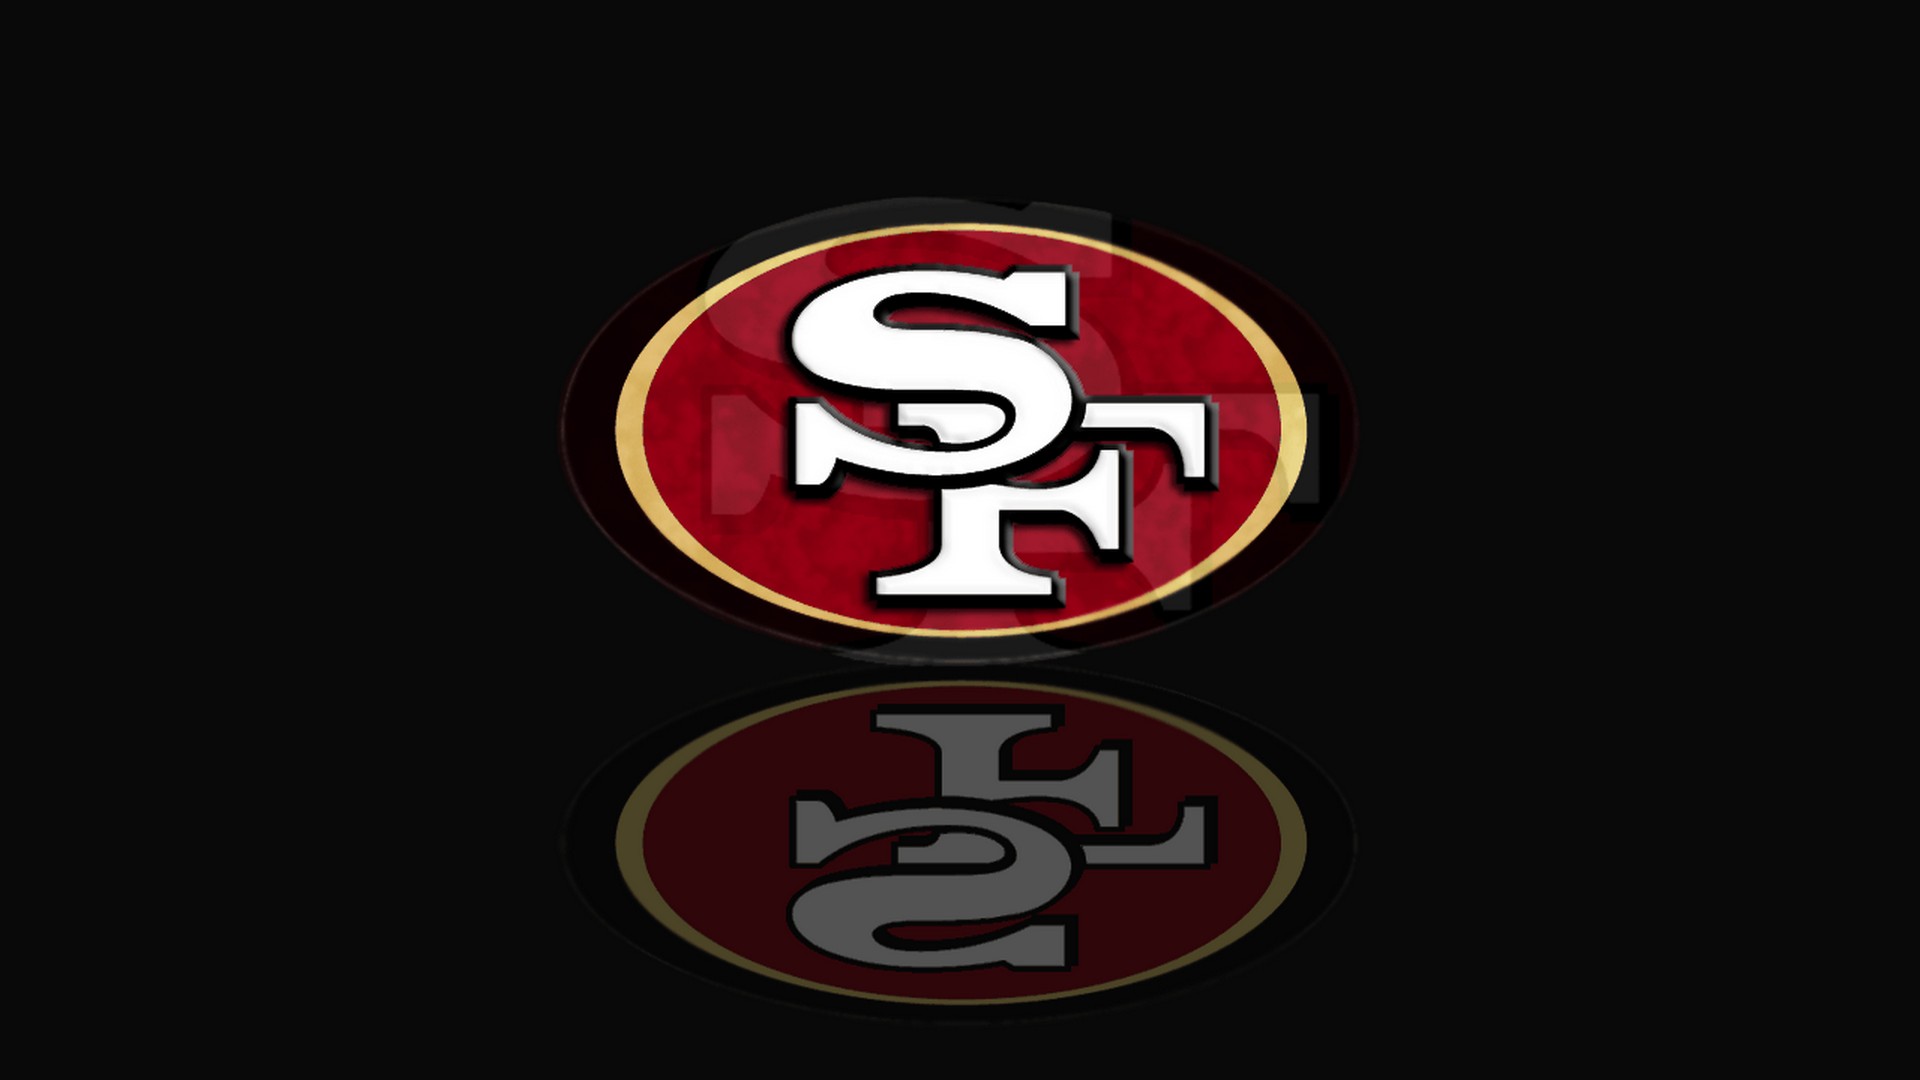 Wallpapers HD San Francisco 49ers With high-resolution 1920X1080 pixel. You can use this wallpaper for your Mac or Windows Desktop Background, iPhone, Android or Tablet and another Smartphone device